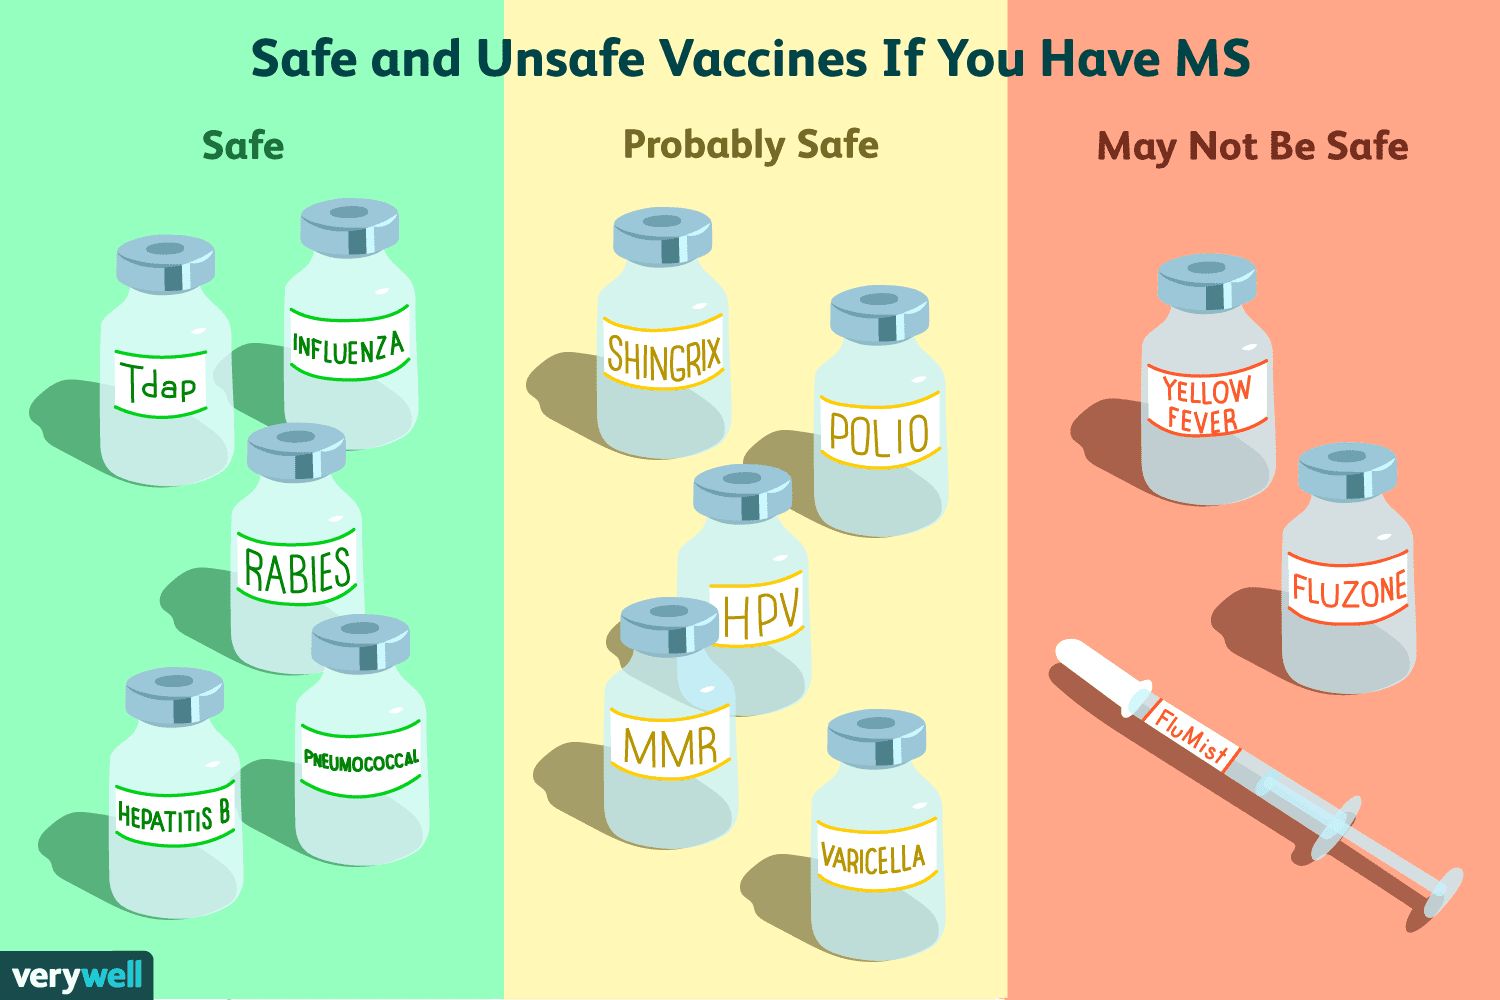 Safe and Unsafe Vaccines With MS